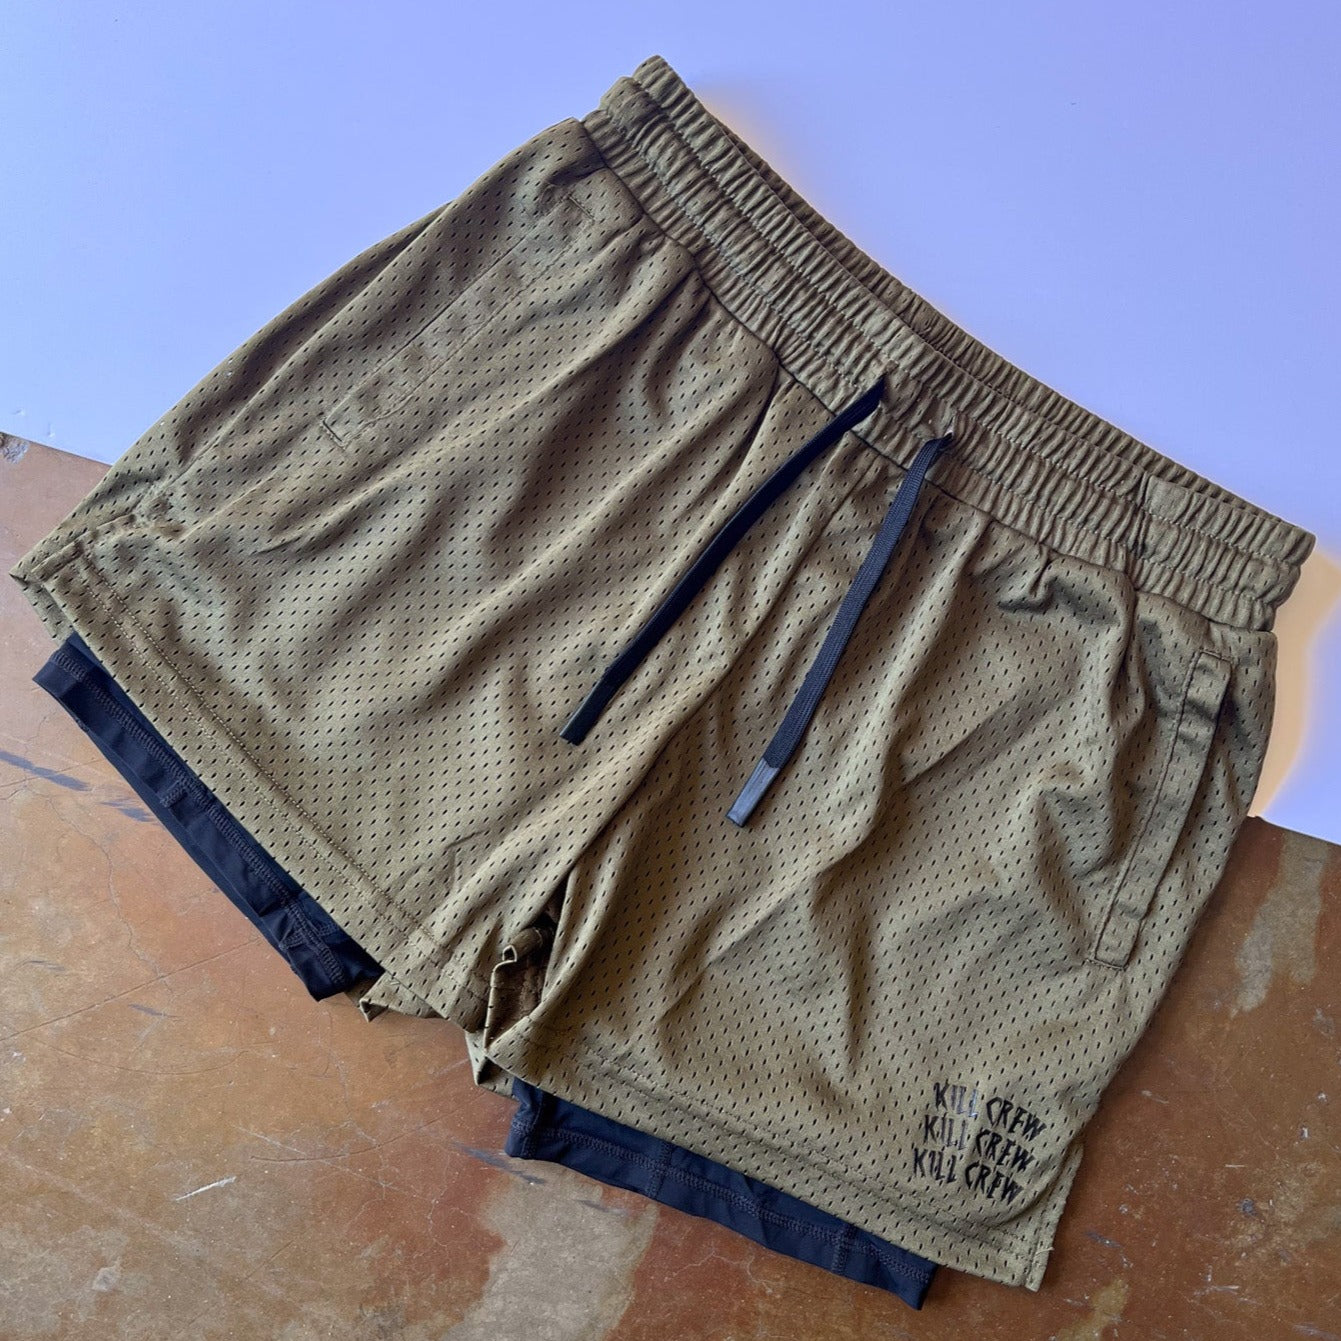 TRAINING SHORT WITH LINER - OLIVE